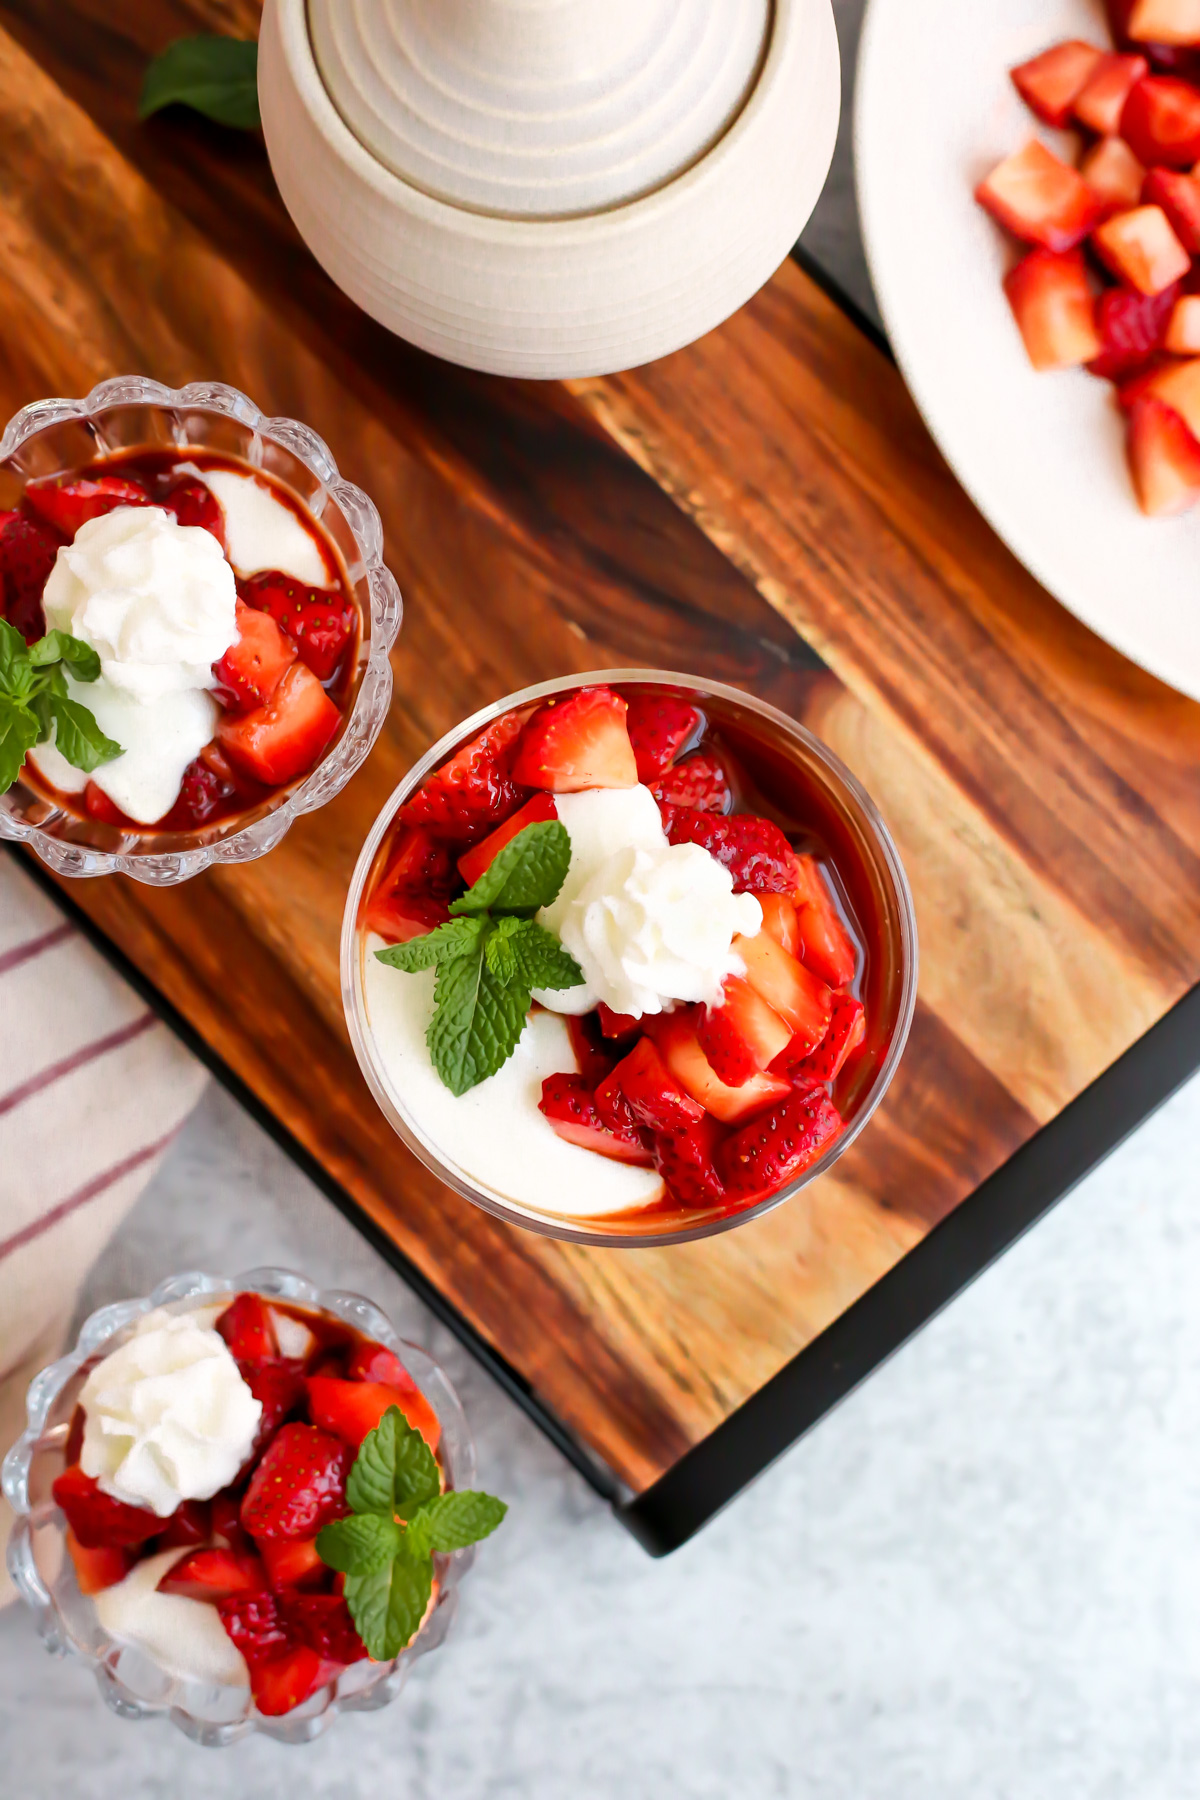 Overhead view of a serving platter with small glass dishes filled with strawberries and cream. A small sprig of fresh mint decorates the side of each dish along with a dollop of fresh whipped cream